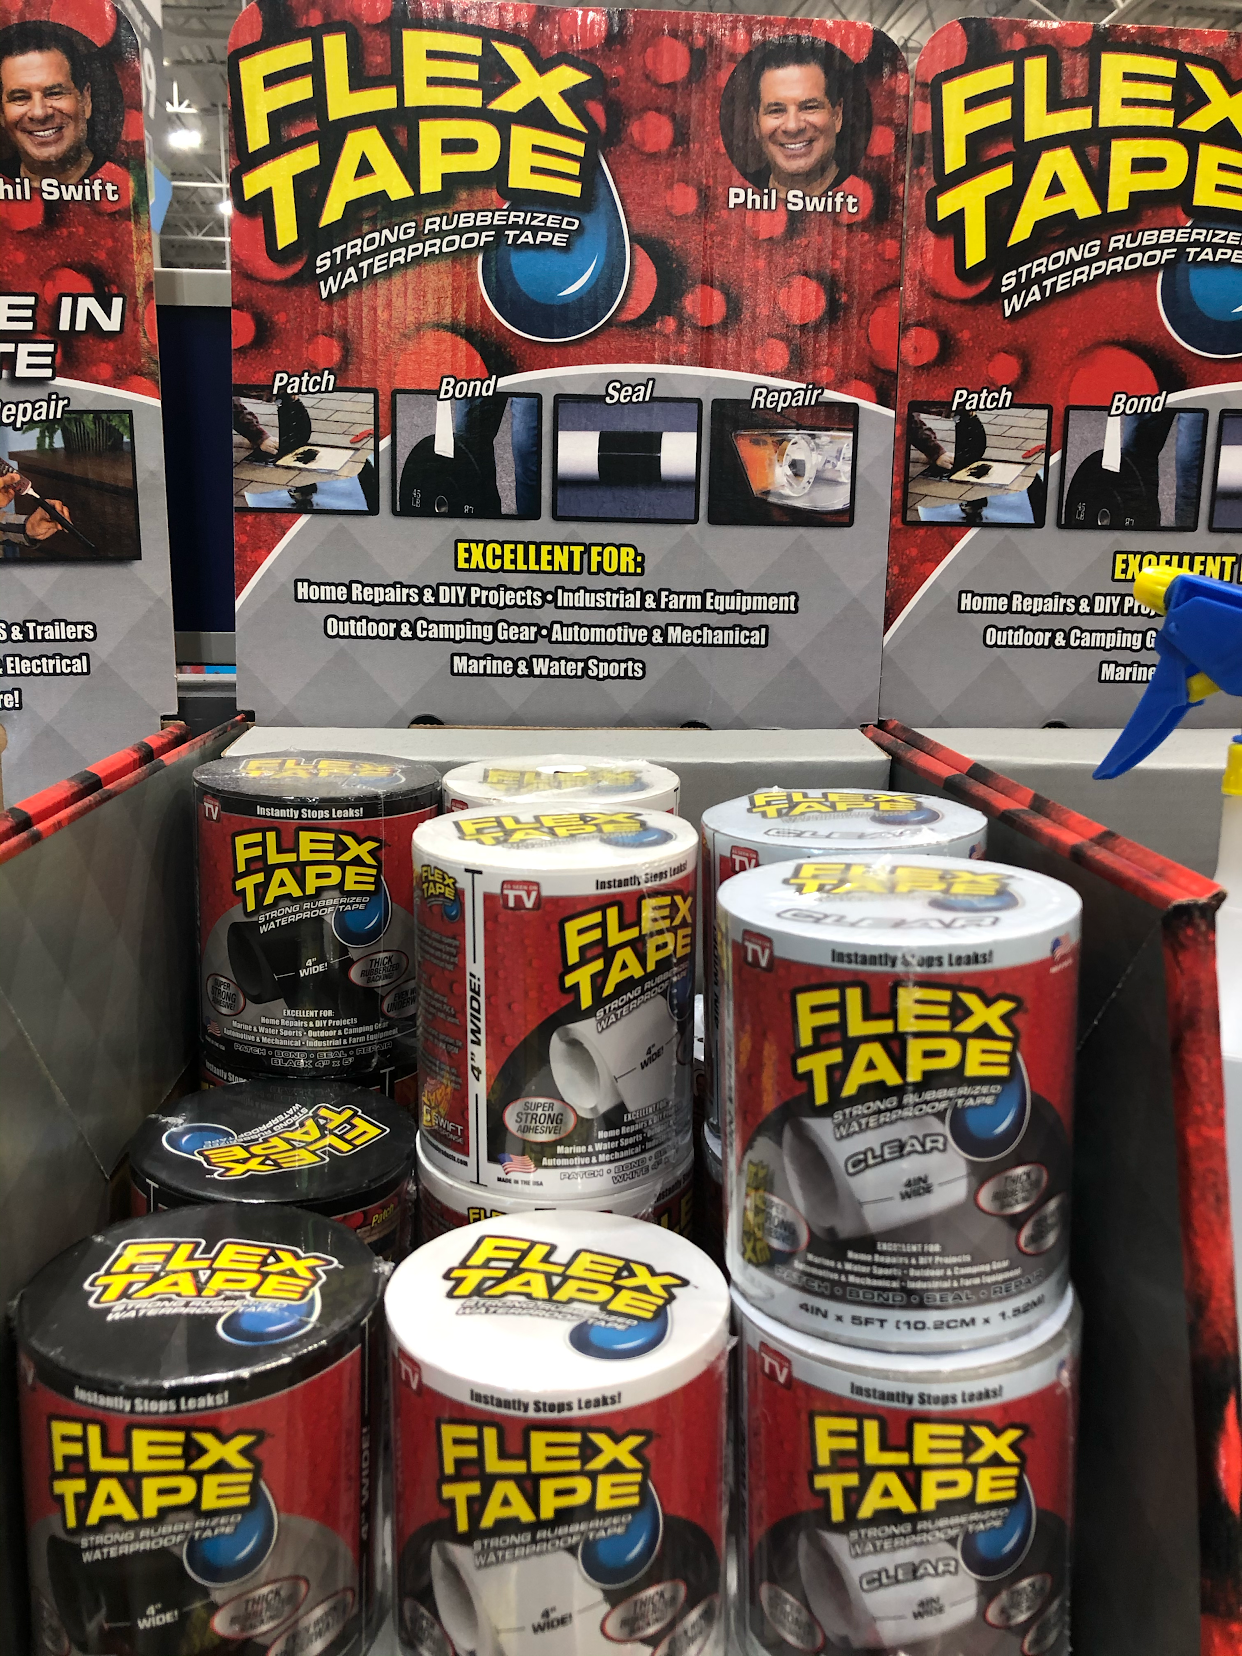 Phil Swift here with flex tape! Blank Meme Template